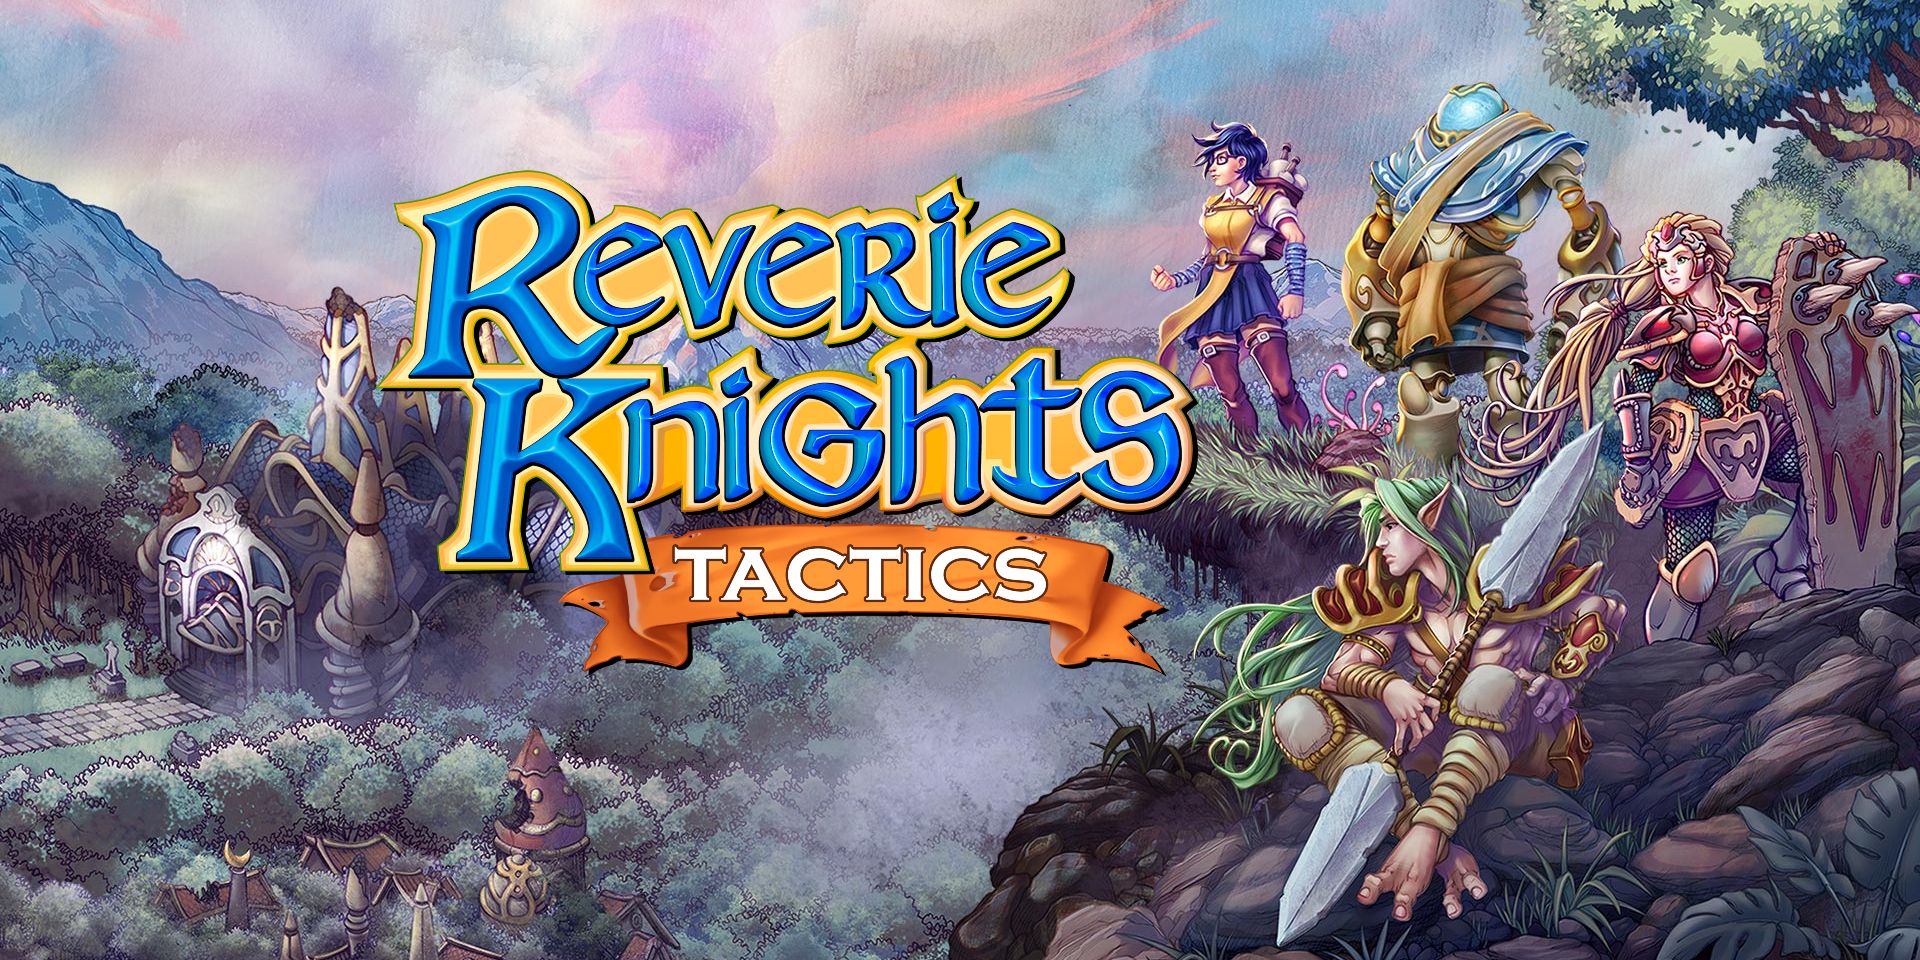 Reverie Knights Tactics Review Cover Art